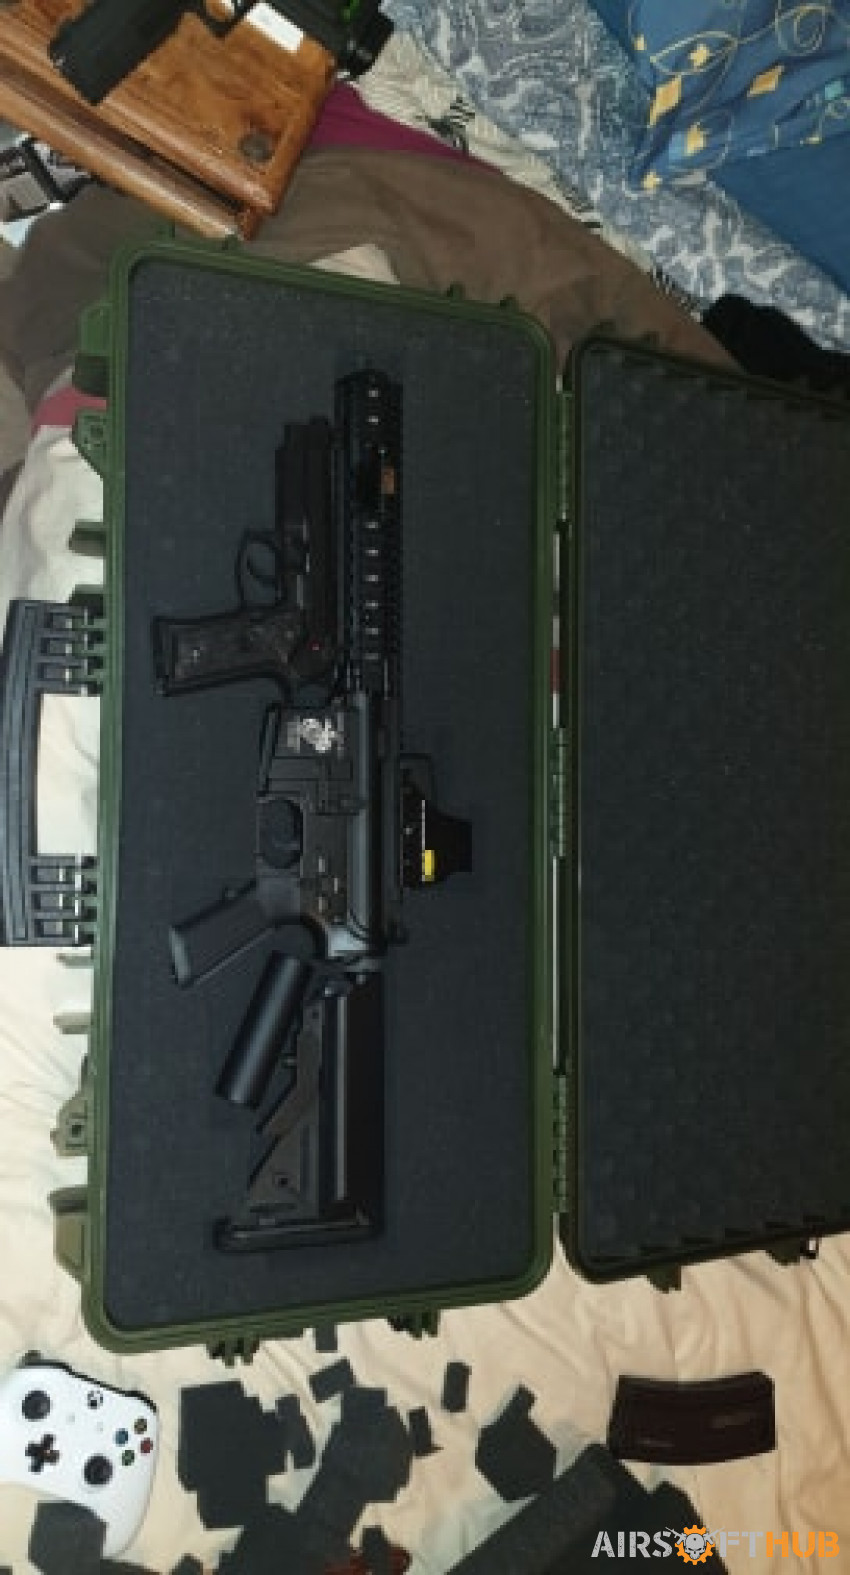 mk18 package deal - Used airsoft equipment